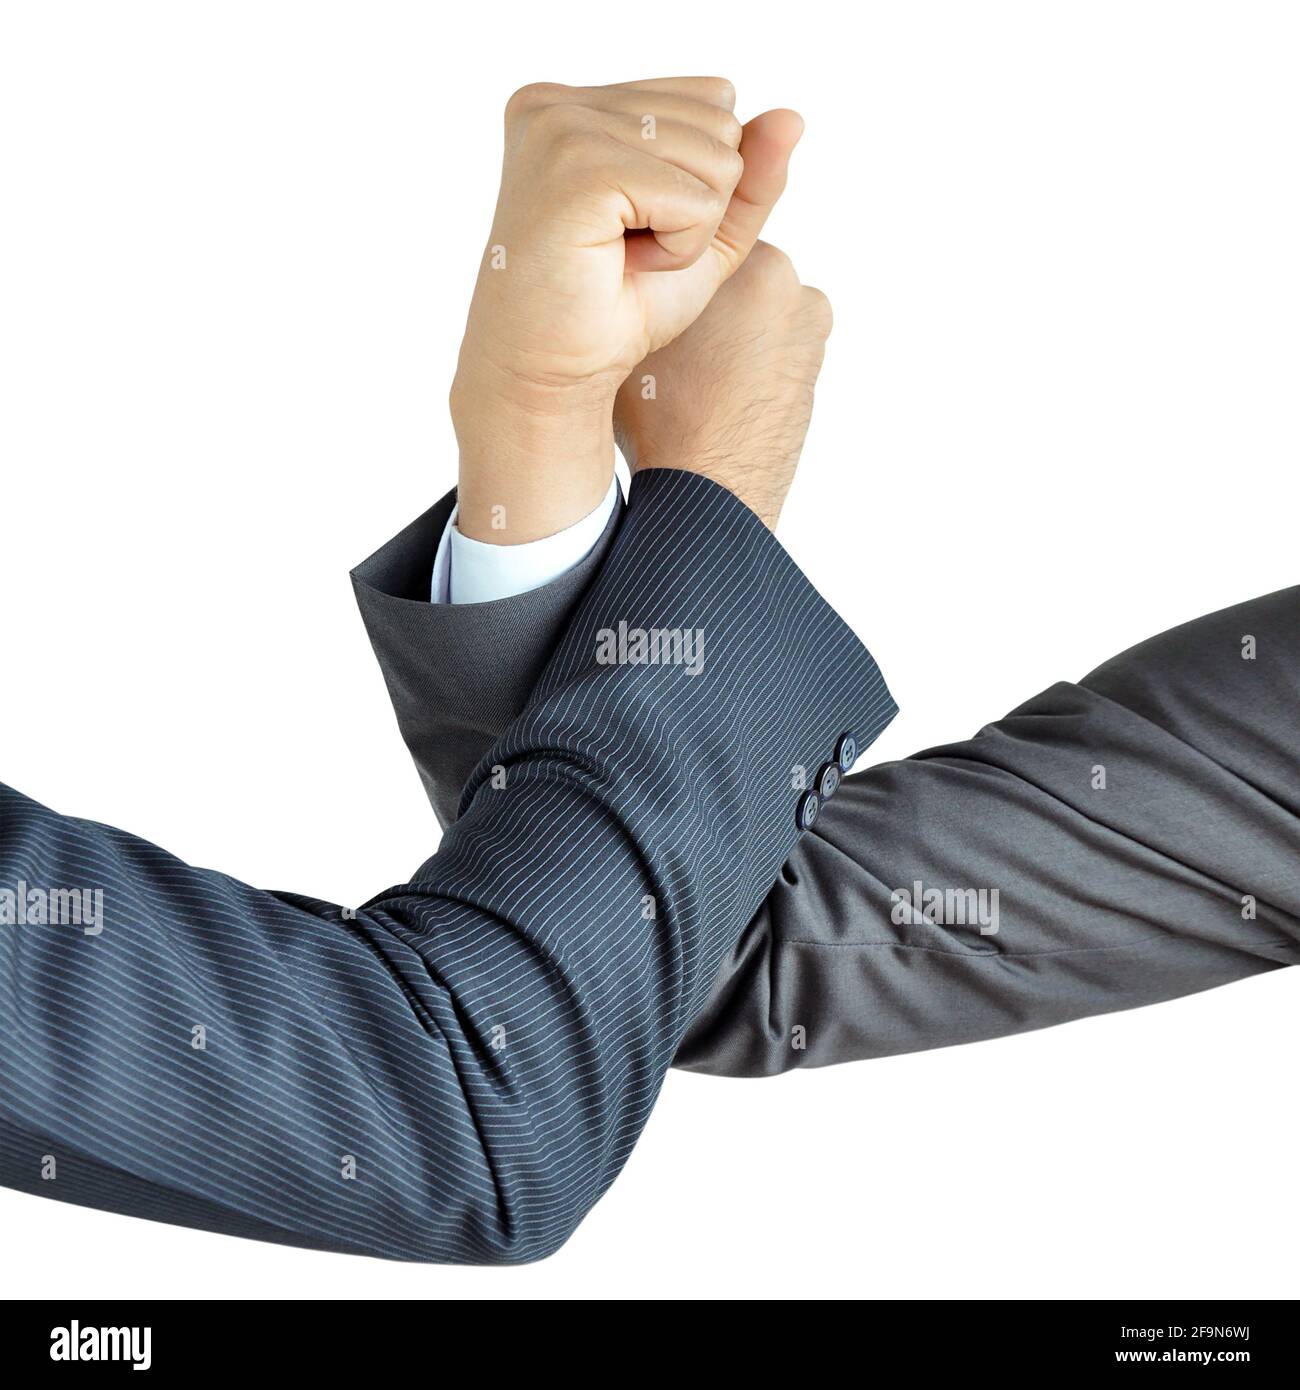 Businessman hands engage in arm wrestling Stock Photo